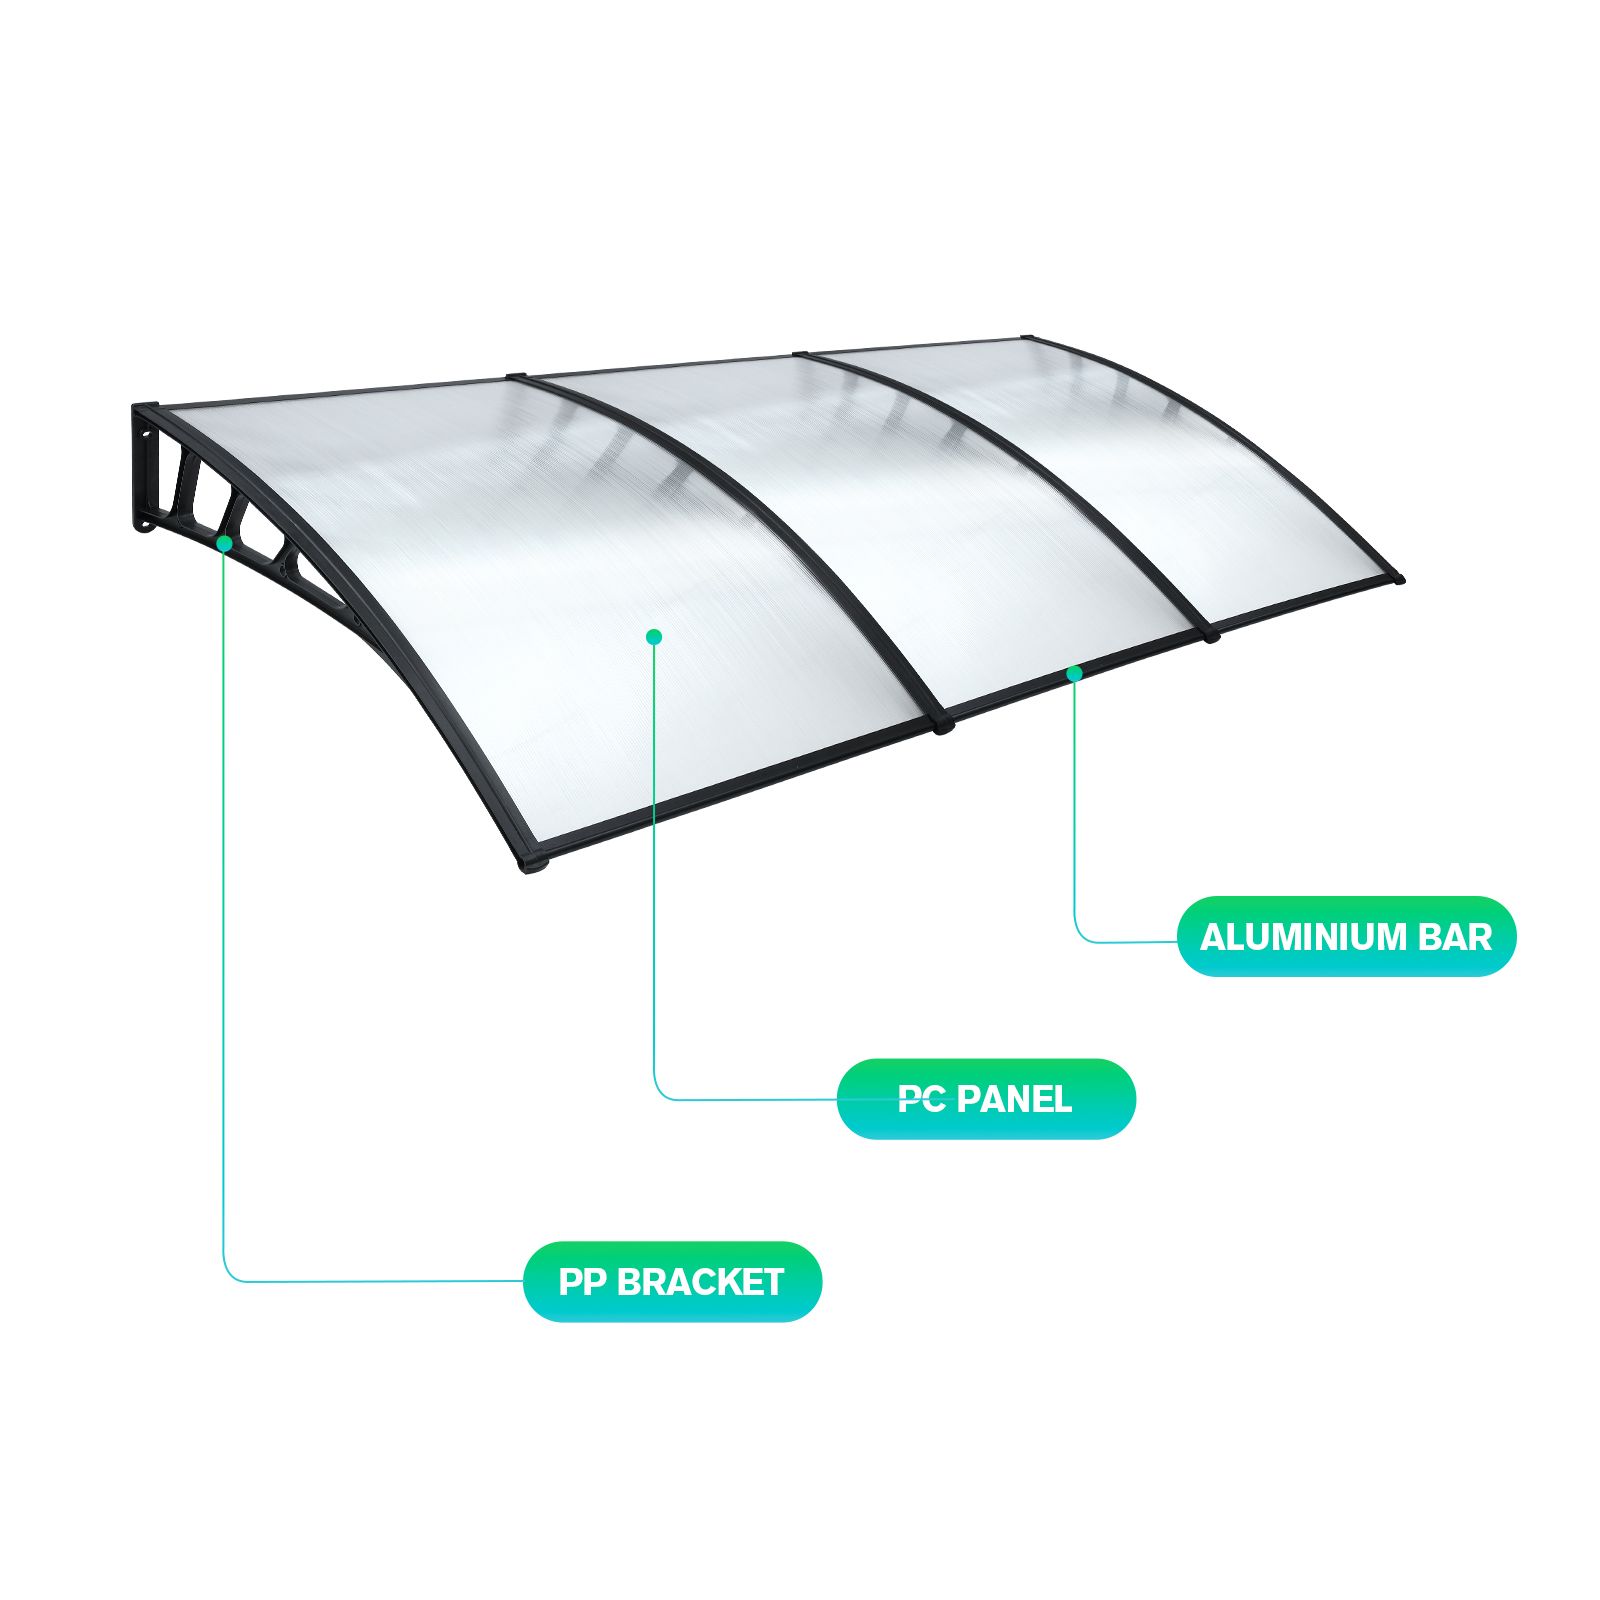 Window Awning Front Door Outdoor Patio Canopy Deck Balcony Porch House Cover Sun Shade Rain Snow UV Shield Clear Polycarbonate 1.5x3m